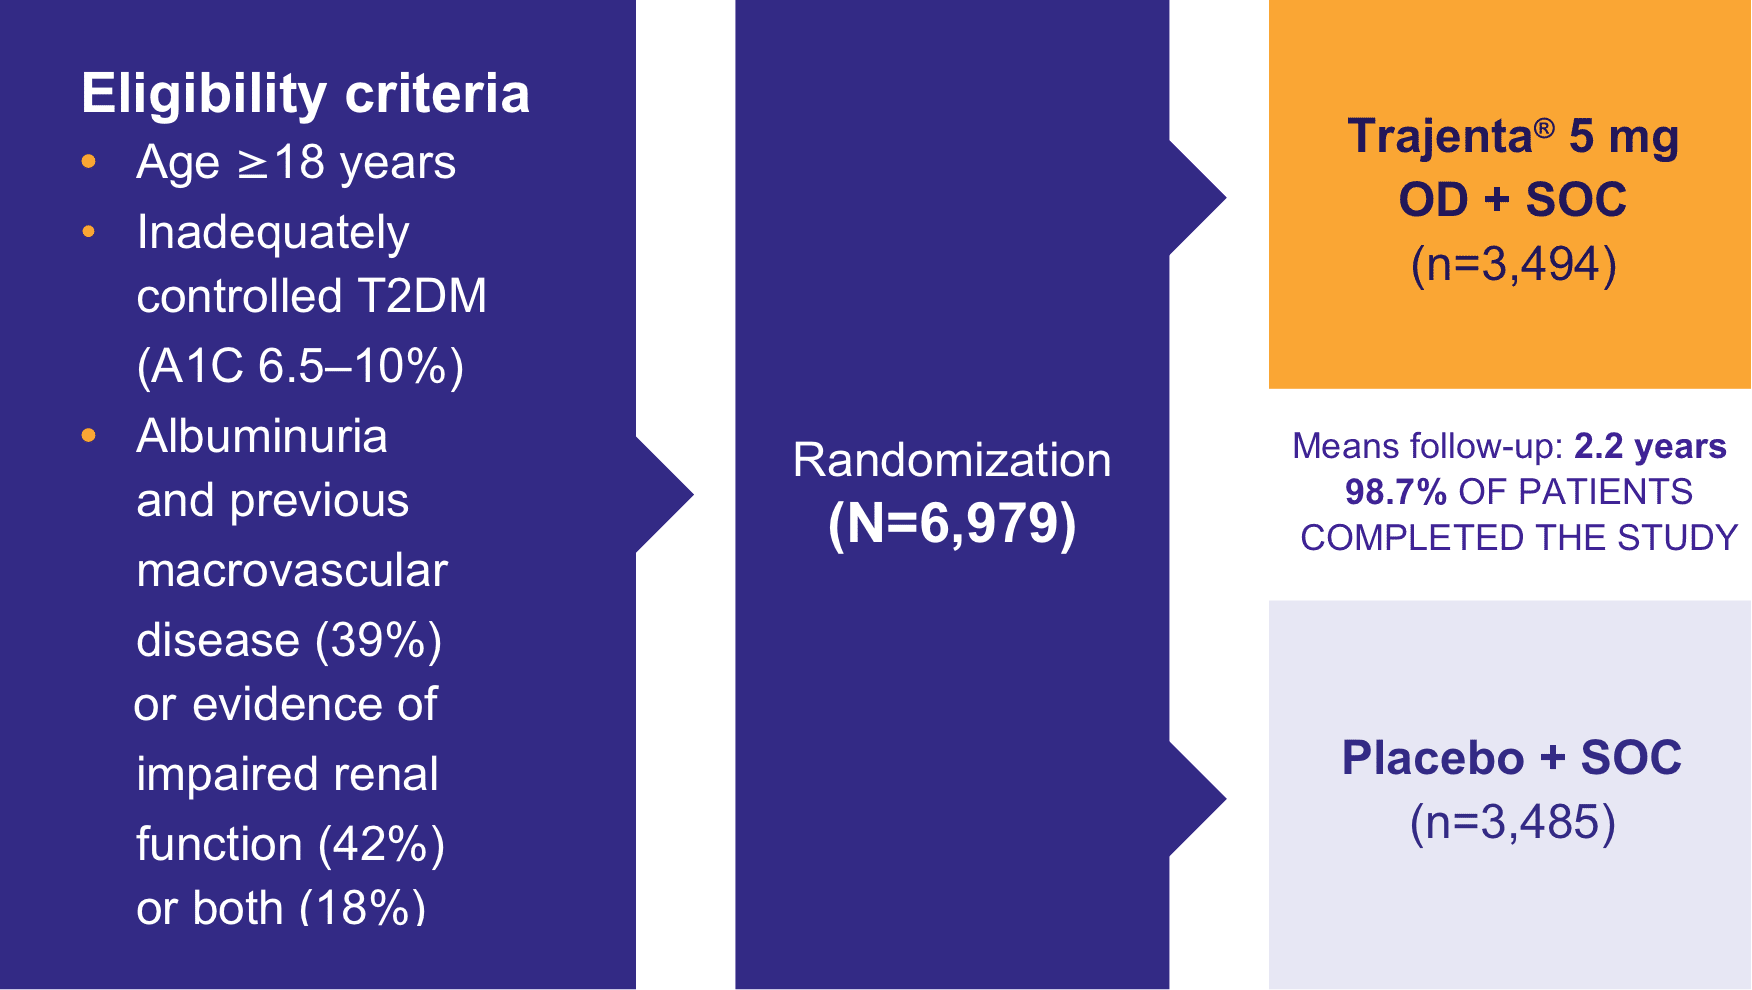 Eligibility criteria included: Age ≥18 years, Inadequately controlled T2D (A1C 6.5 to 10%), Albuminuria and previous macrovascular disease (39%) or evidence of impaired renal function (42%) or both (18%). Randomization (N=6,979) was to Trajenta® 5 mg once daily plus standard of care (n=3,494) or to placebo plus standard of care (n=3,485). Median follow-up was 2.2 years and 98.7% of patients completed the study.